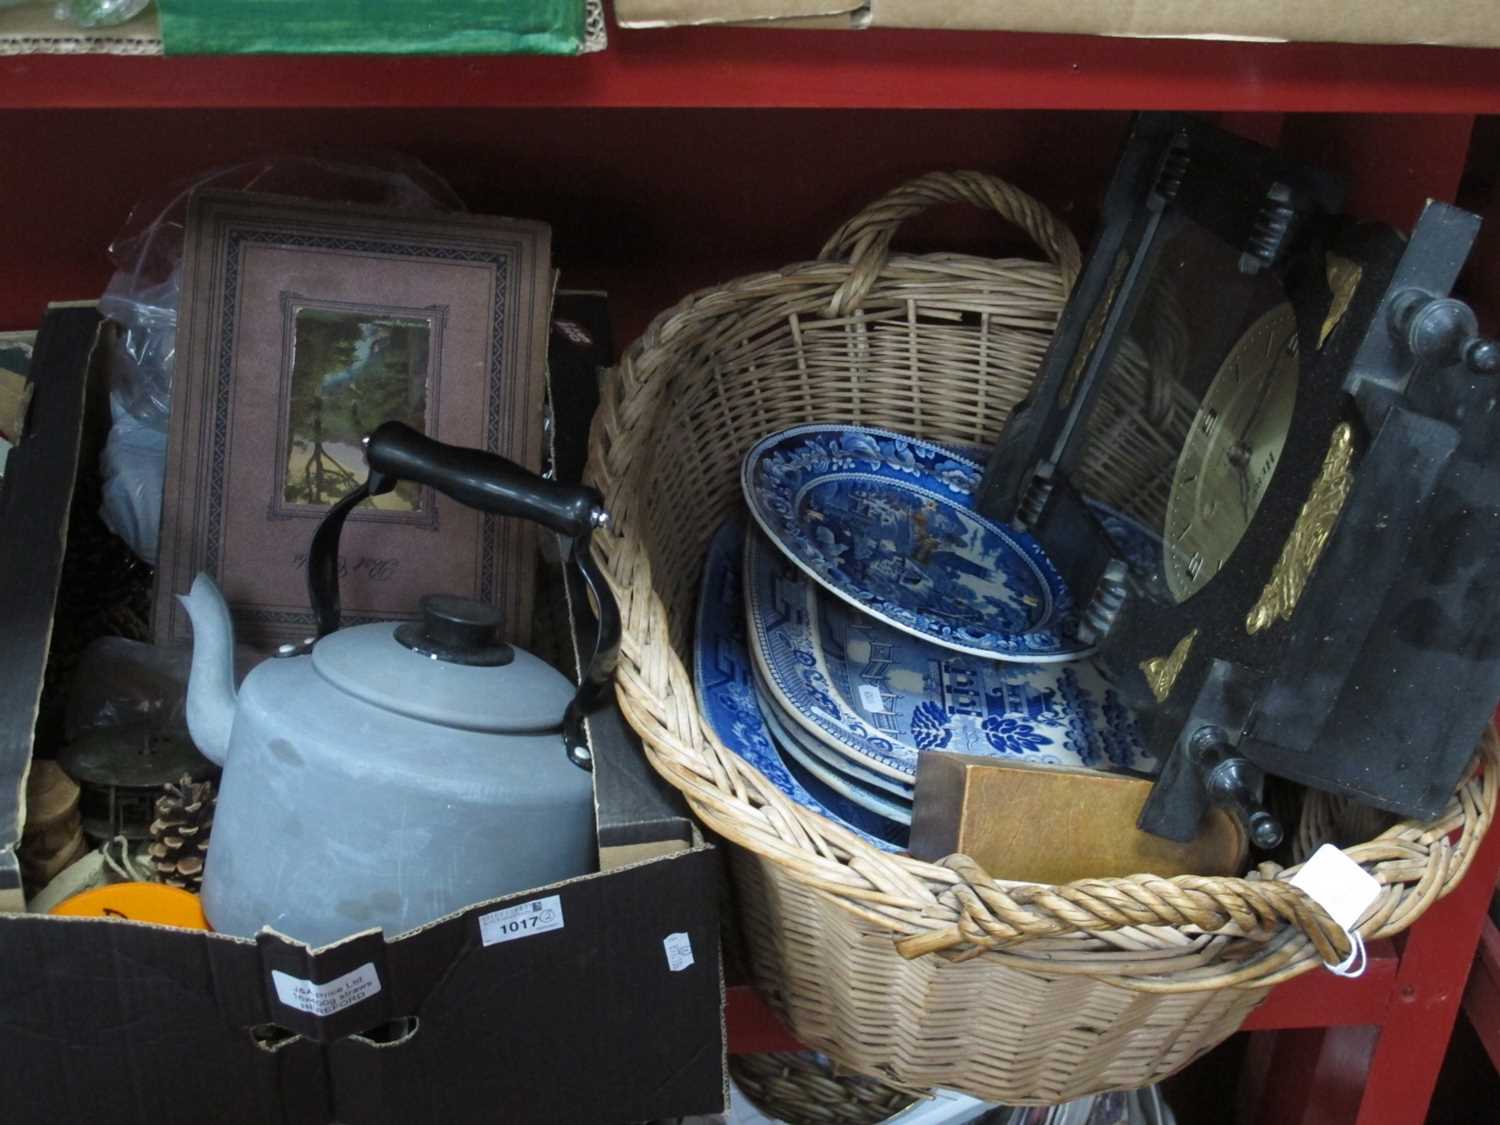 Blue & White Meat Plates, Hero wall clock, postcards in album, Agaluxe kettle, etc, basket and box